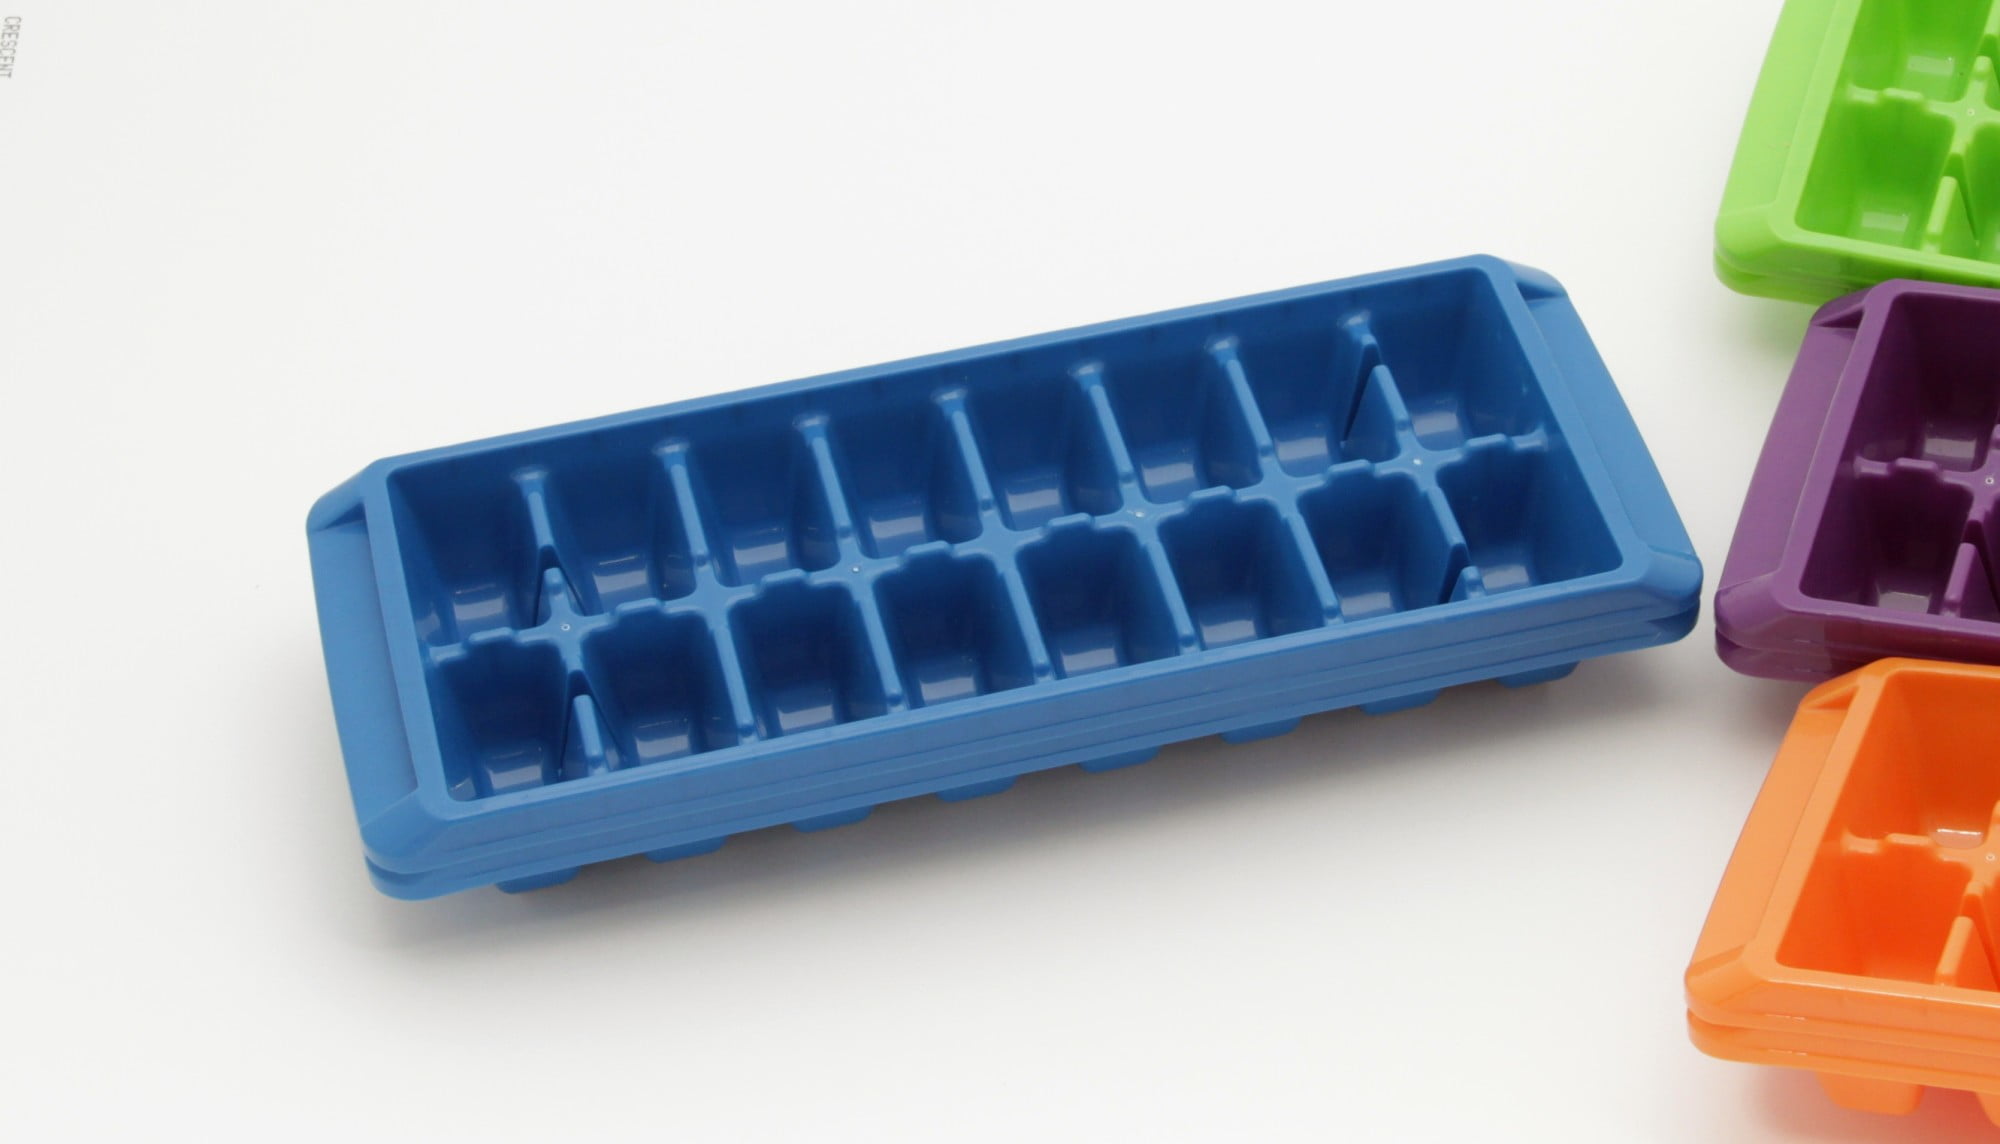 Home Basics 16 Compartment Square Plastic Stackable Ice Cube Tray with  Snap-on Cover, Blue, KITCHEN ORGANIZATION